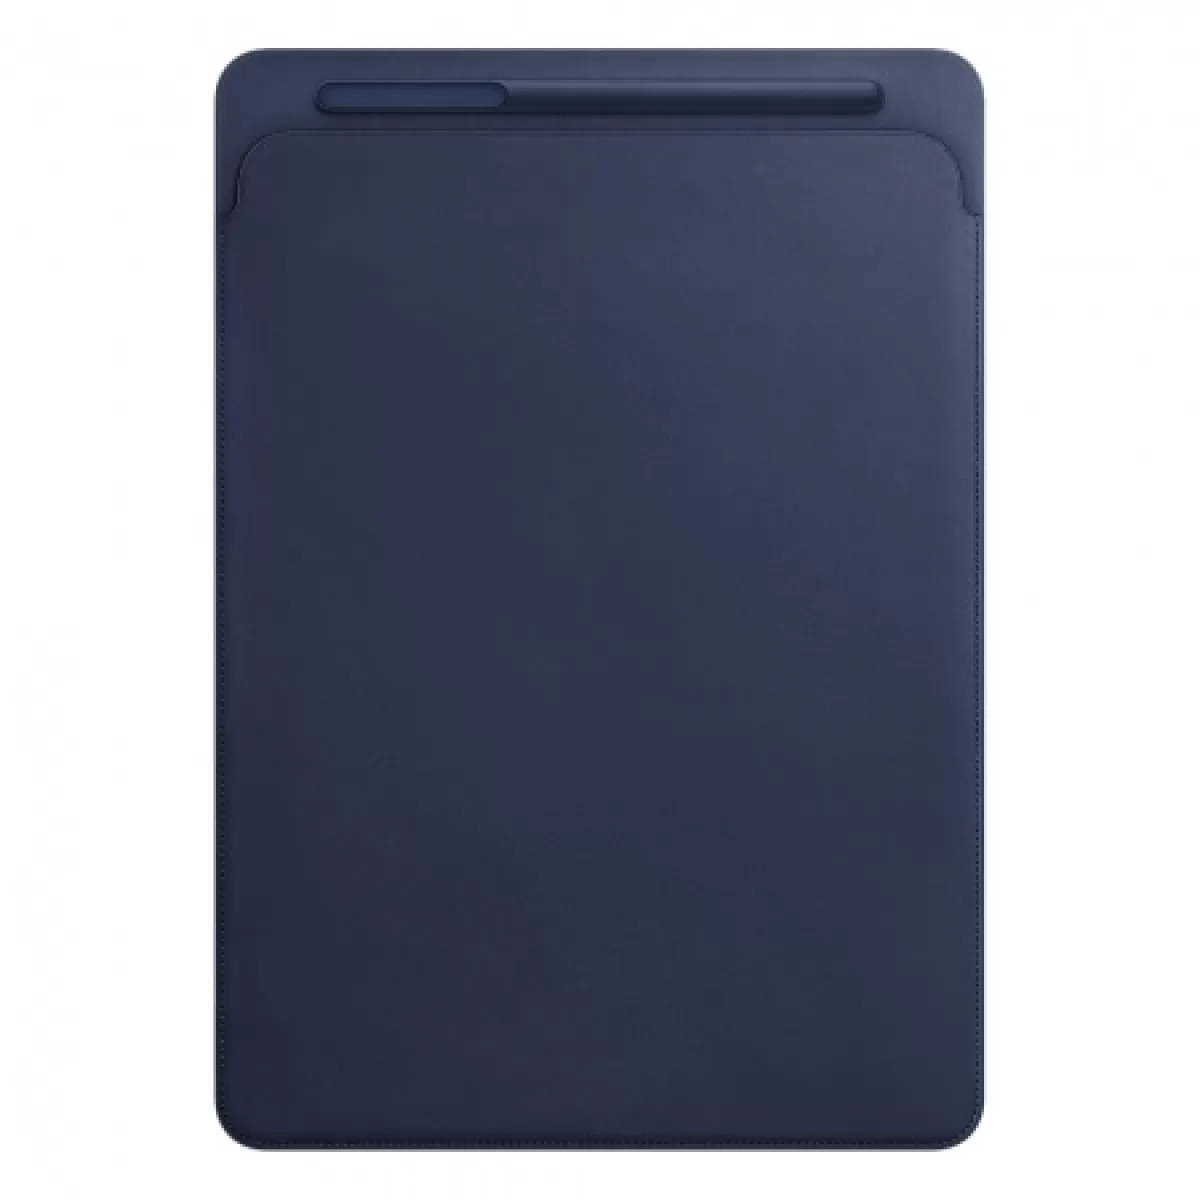 Apple Leather Sleeve for 12.9inch iPad Pro Midnight Blue